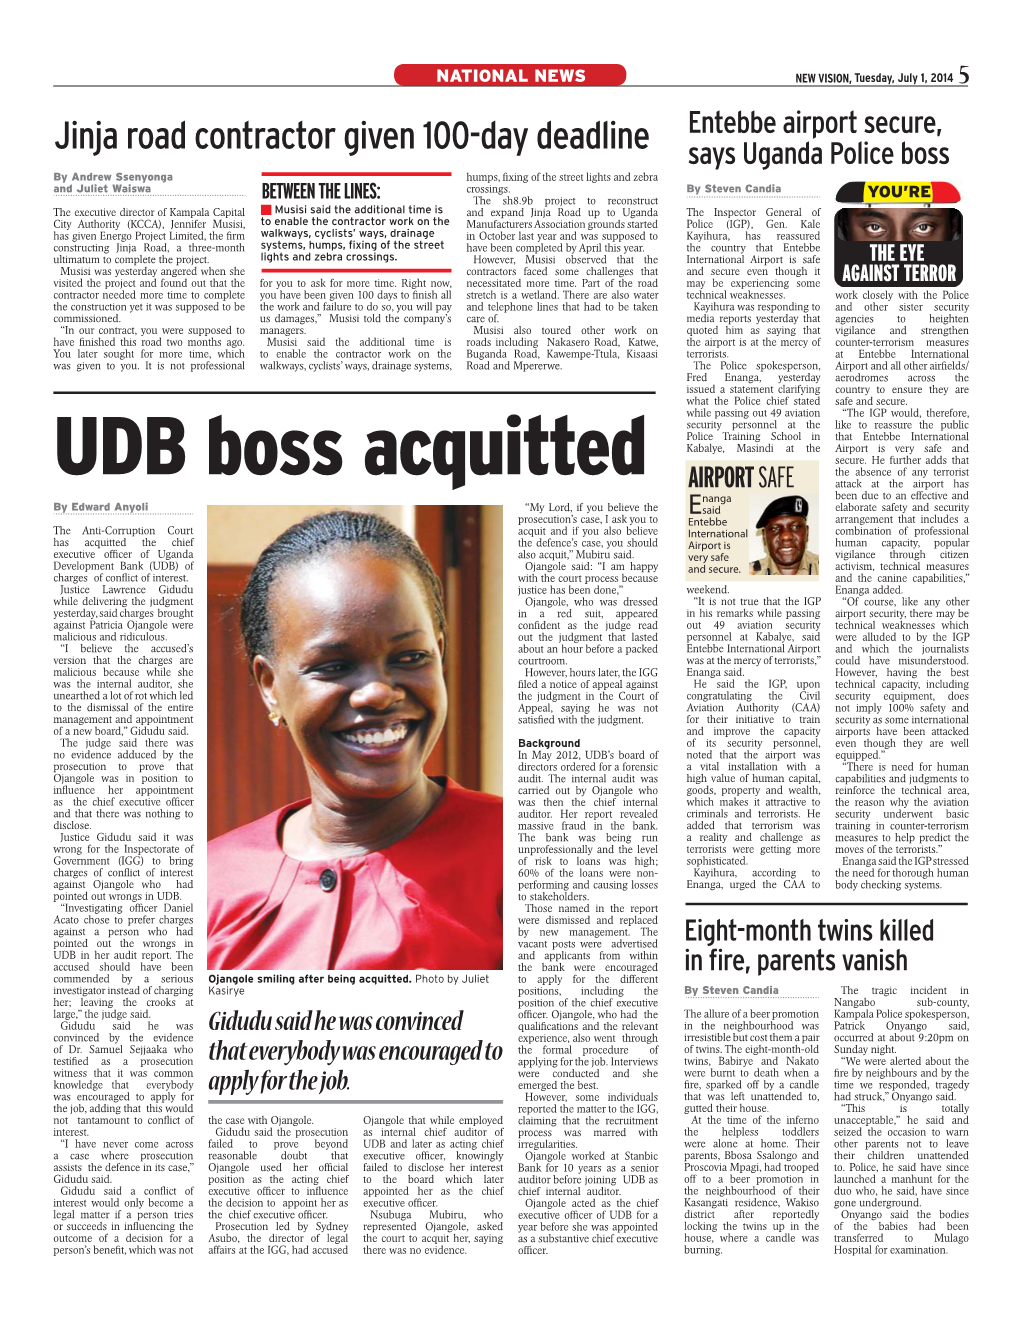 UDB Boss Acquitted Secure